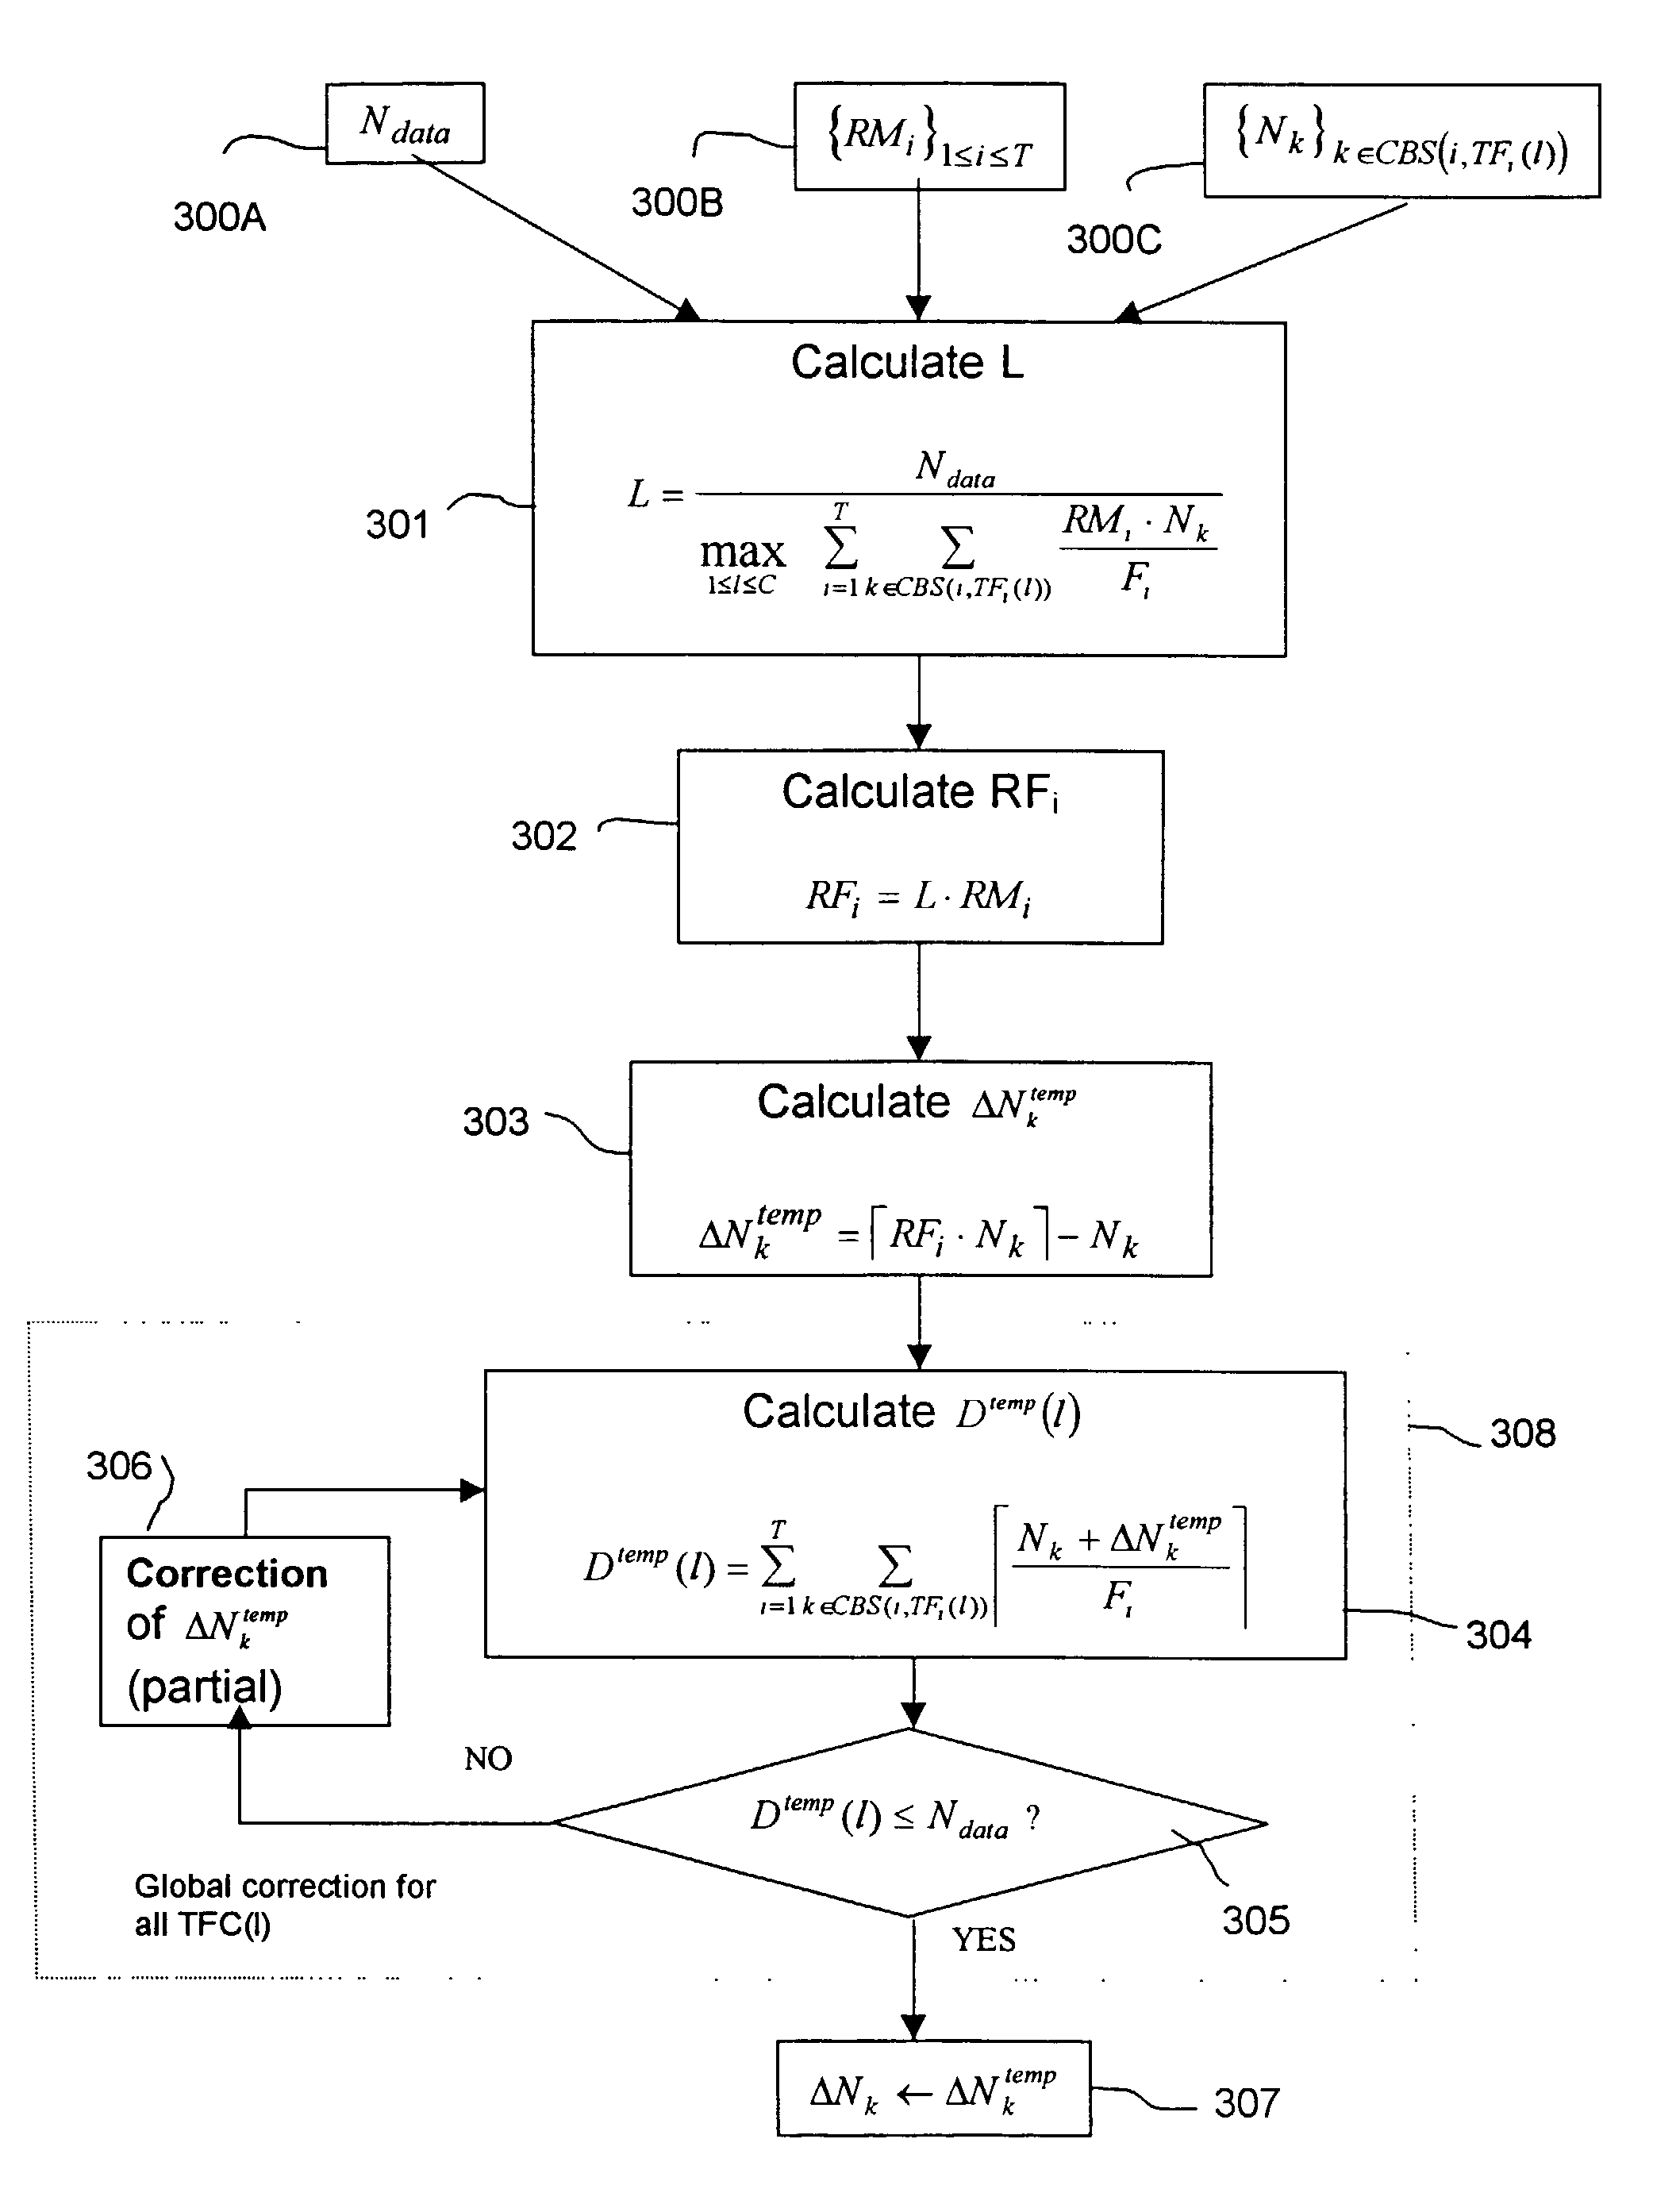 Method for configuring a telecommunication system